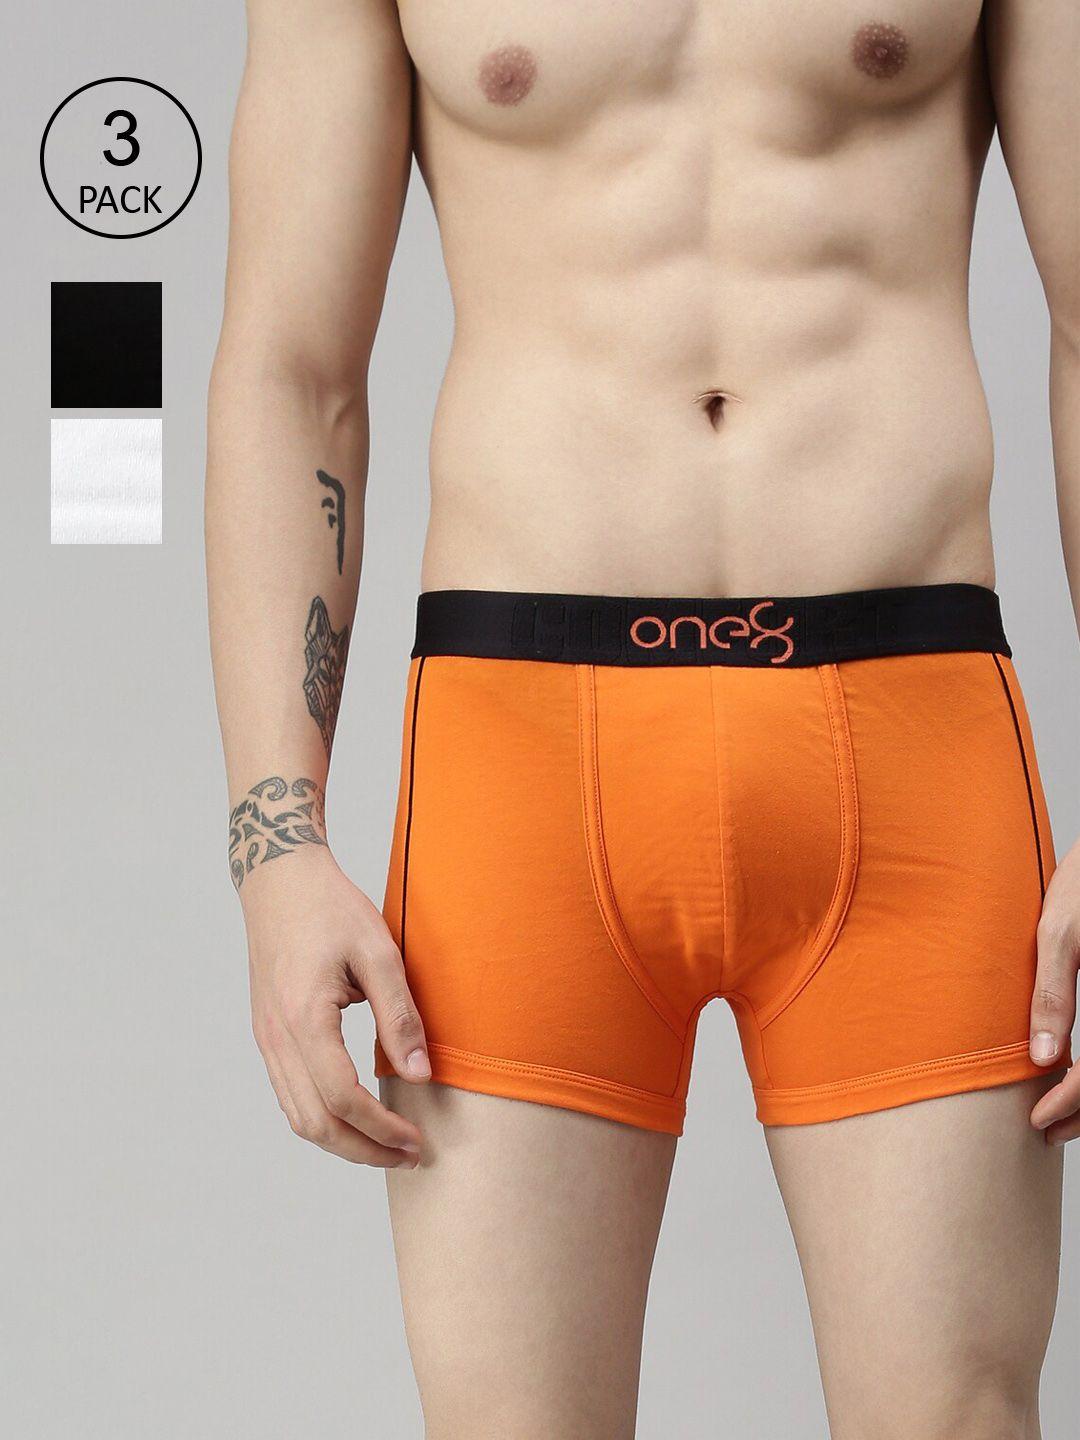 one8 by virat kohli men pack of 3 solid cotton trunk